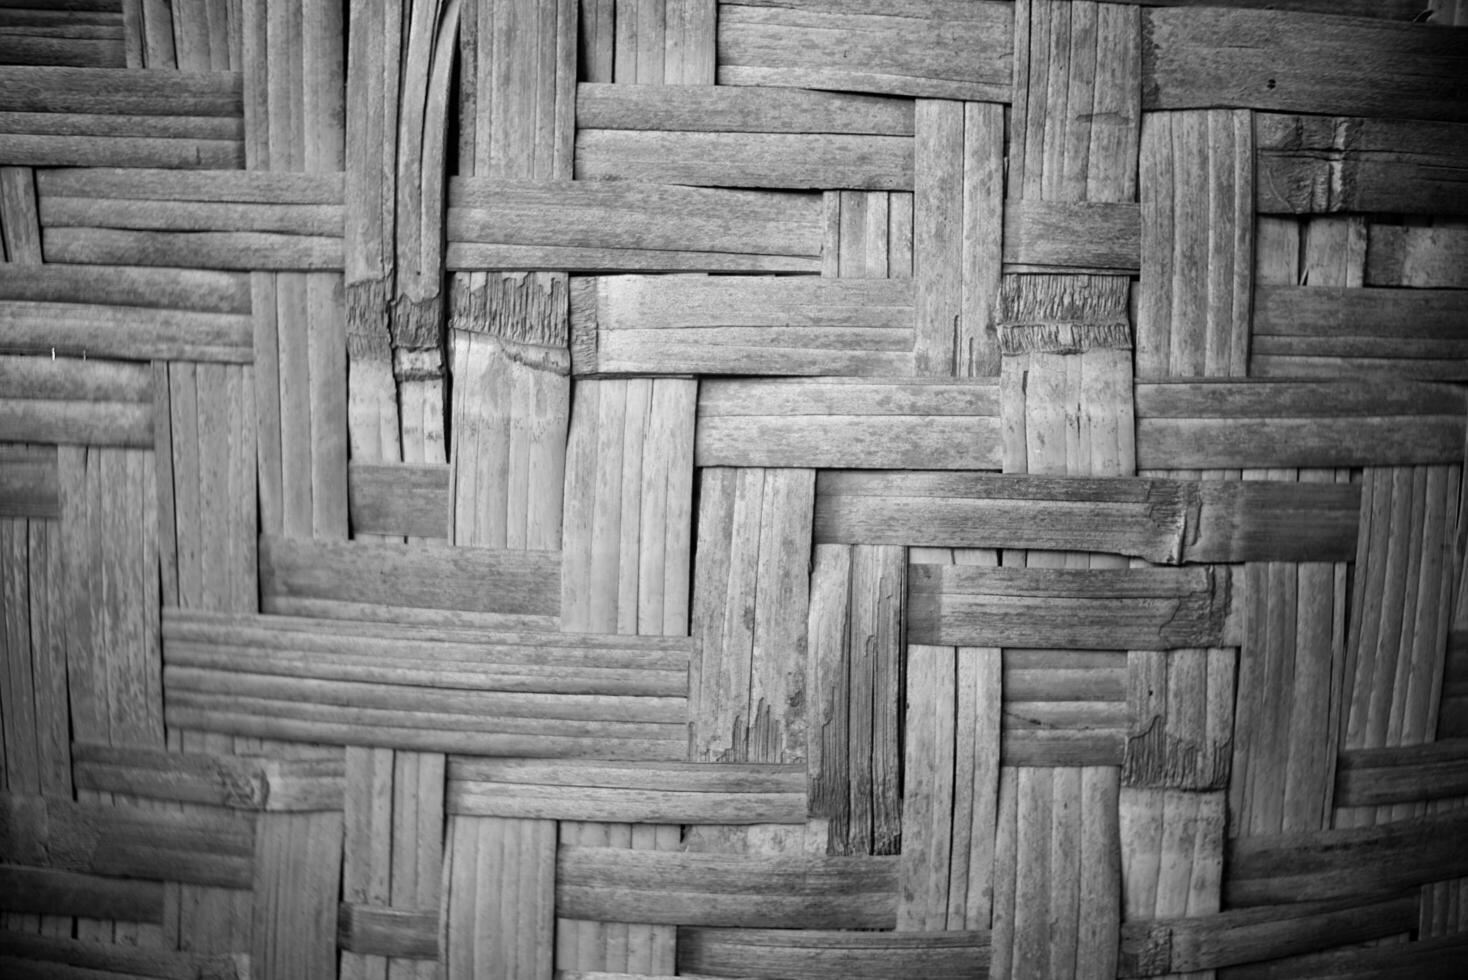 woven bamboo, pattern woven wall, traditional wall, black and white photo